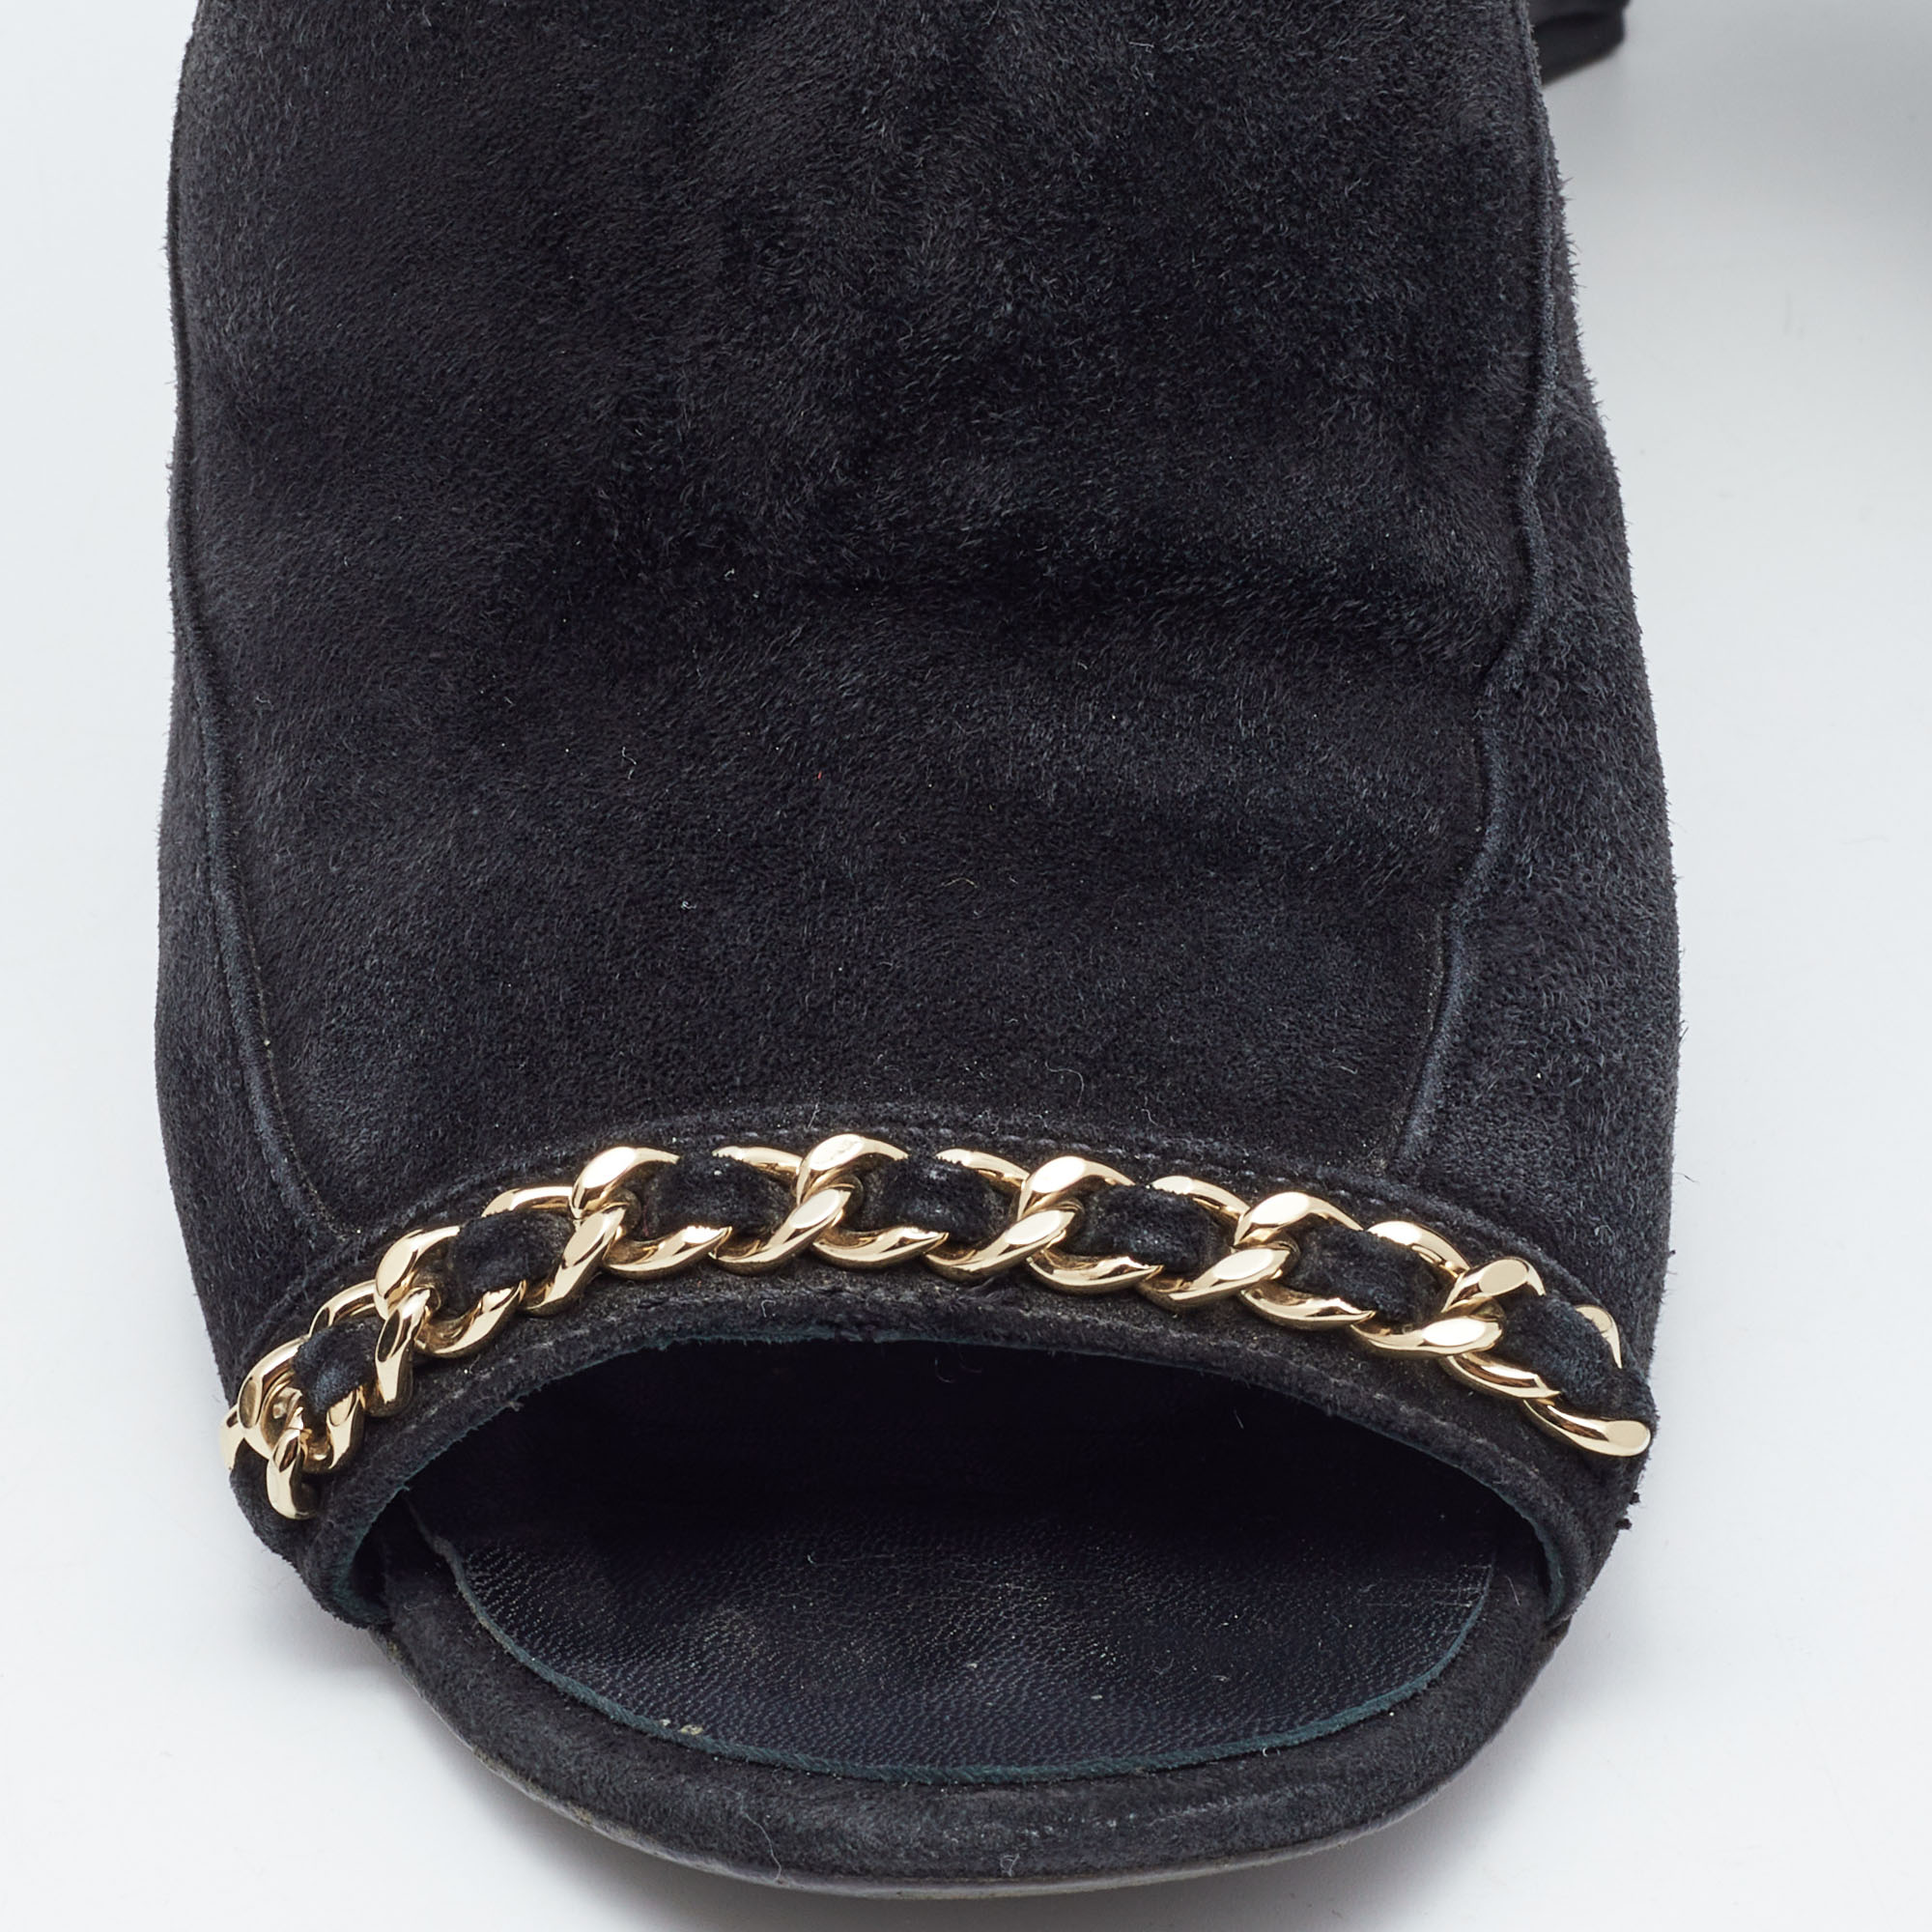 Chanel Black Suede Chain Detail Open Toe Booties Size 40.5